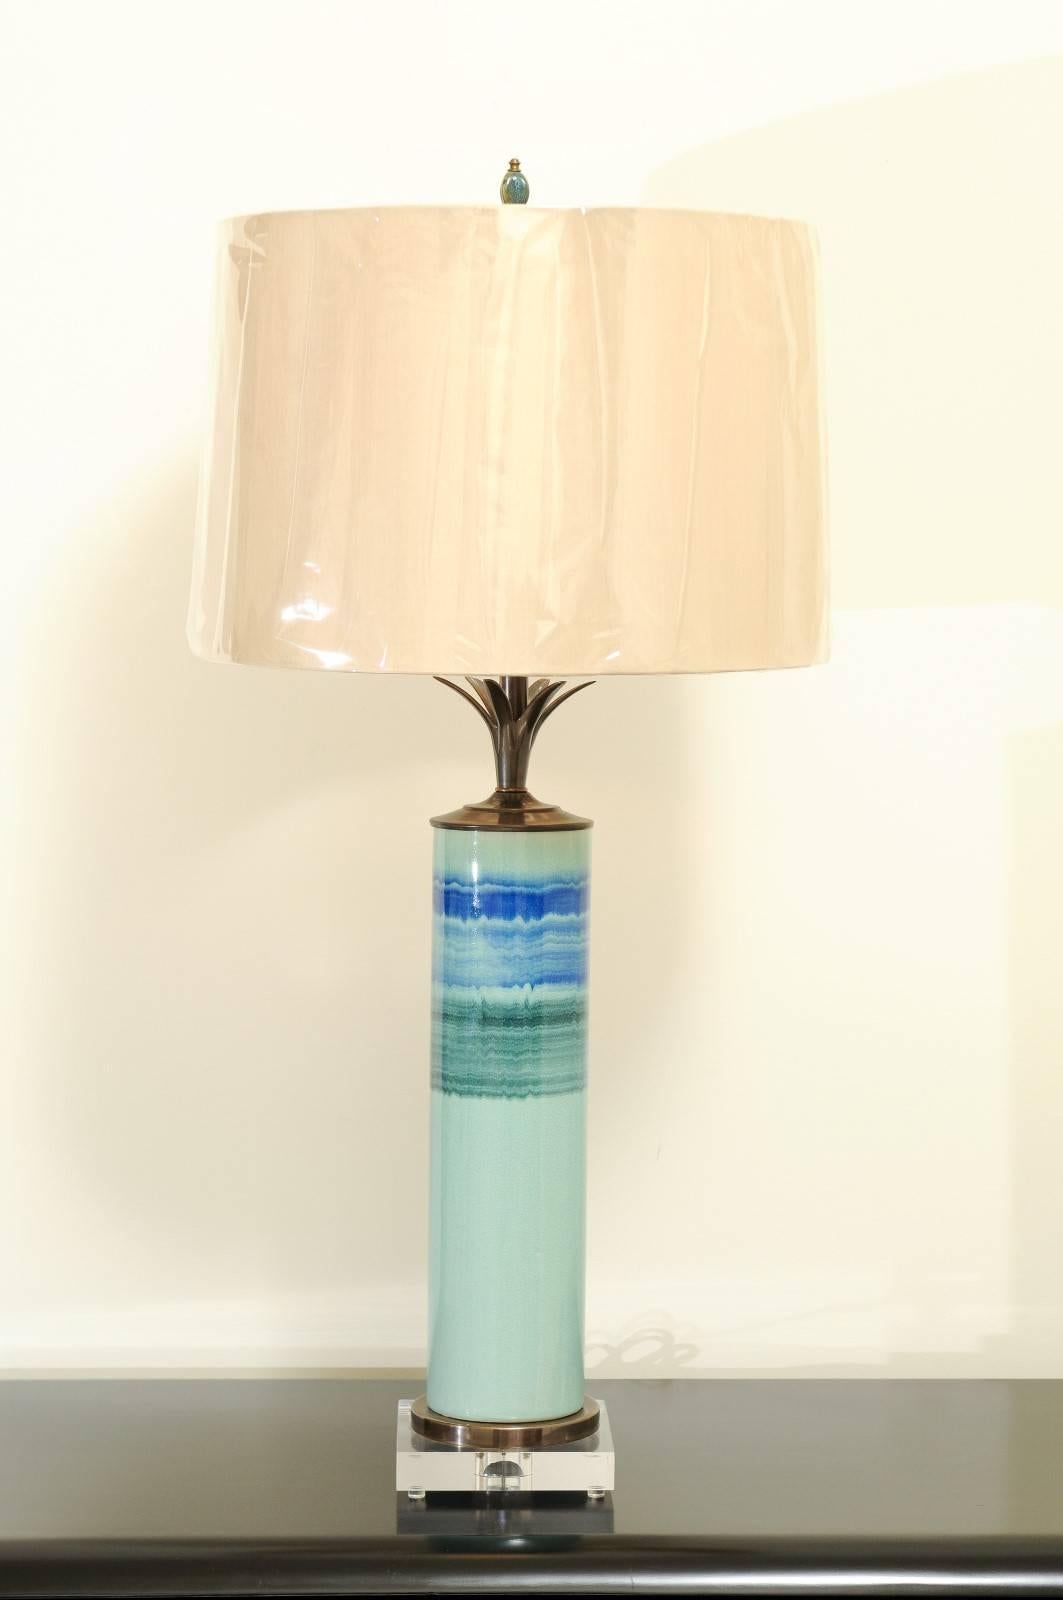 A fabulous pair of vintage drip-glaze ceramic vessels as custom-made lamps. Stunning form and range of color. Custom-built using the finest quality components. Exceptional jewelry! Excellent restored condition. Wired using clear cord; new bronze